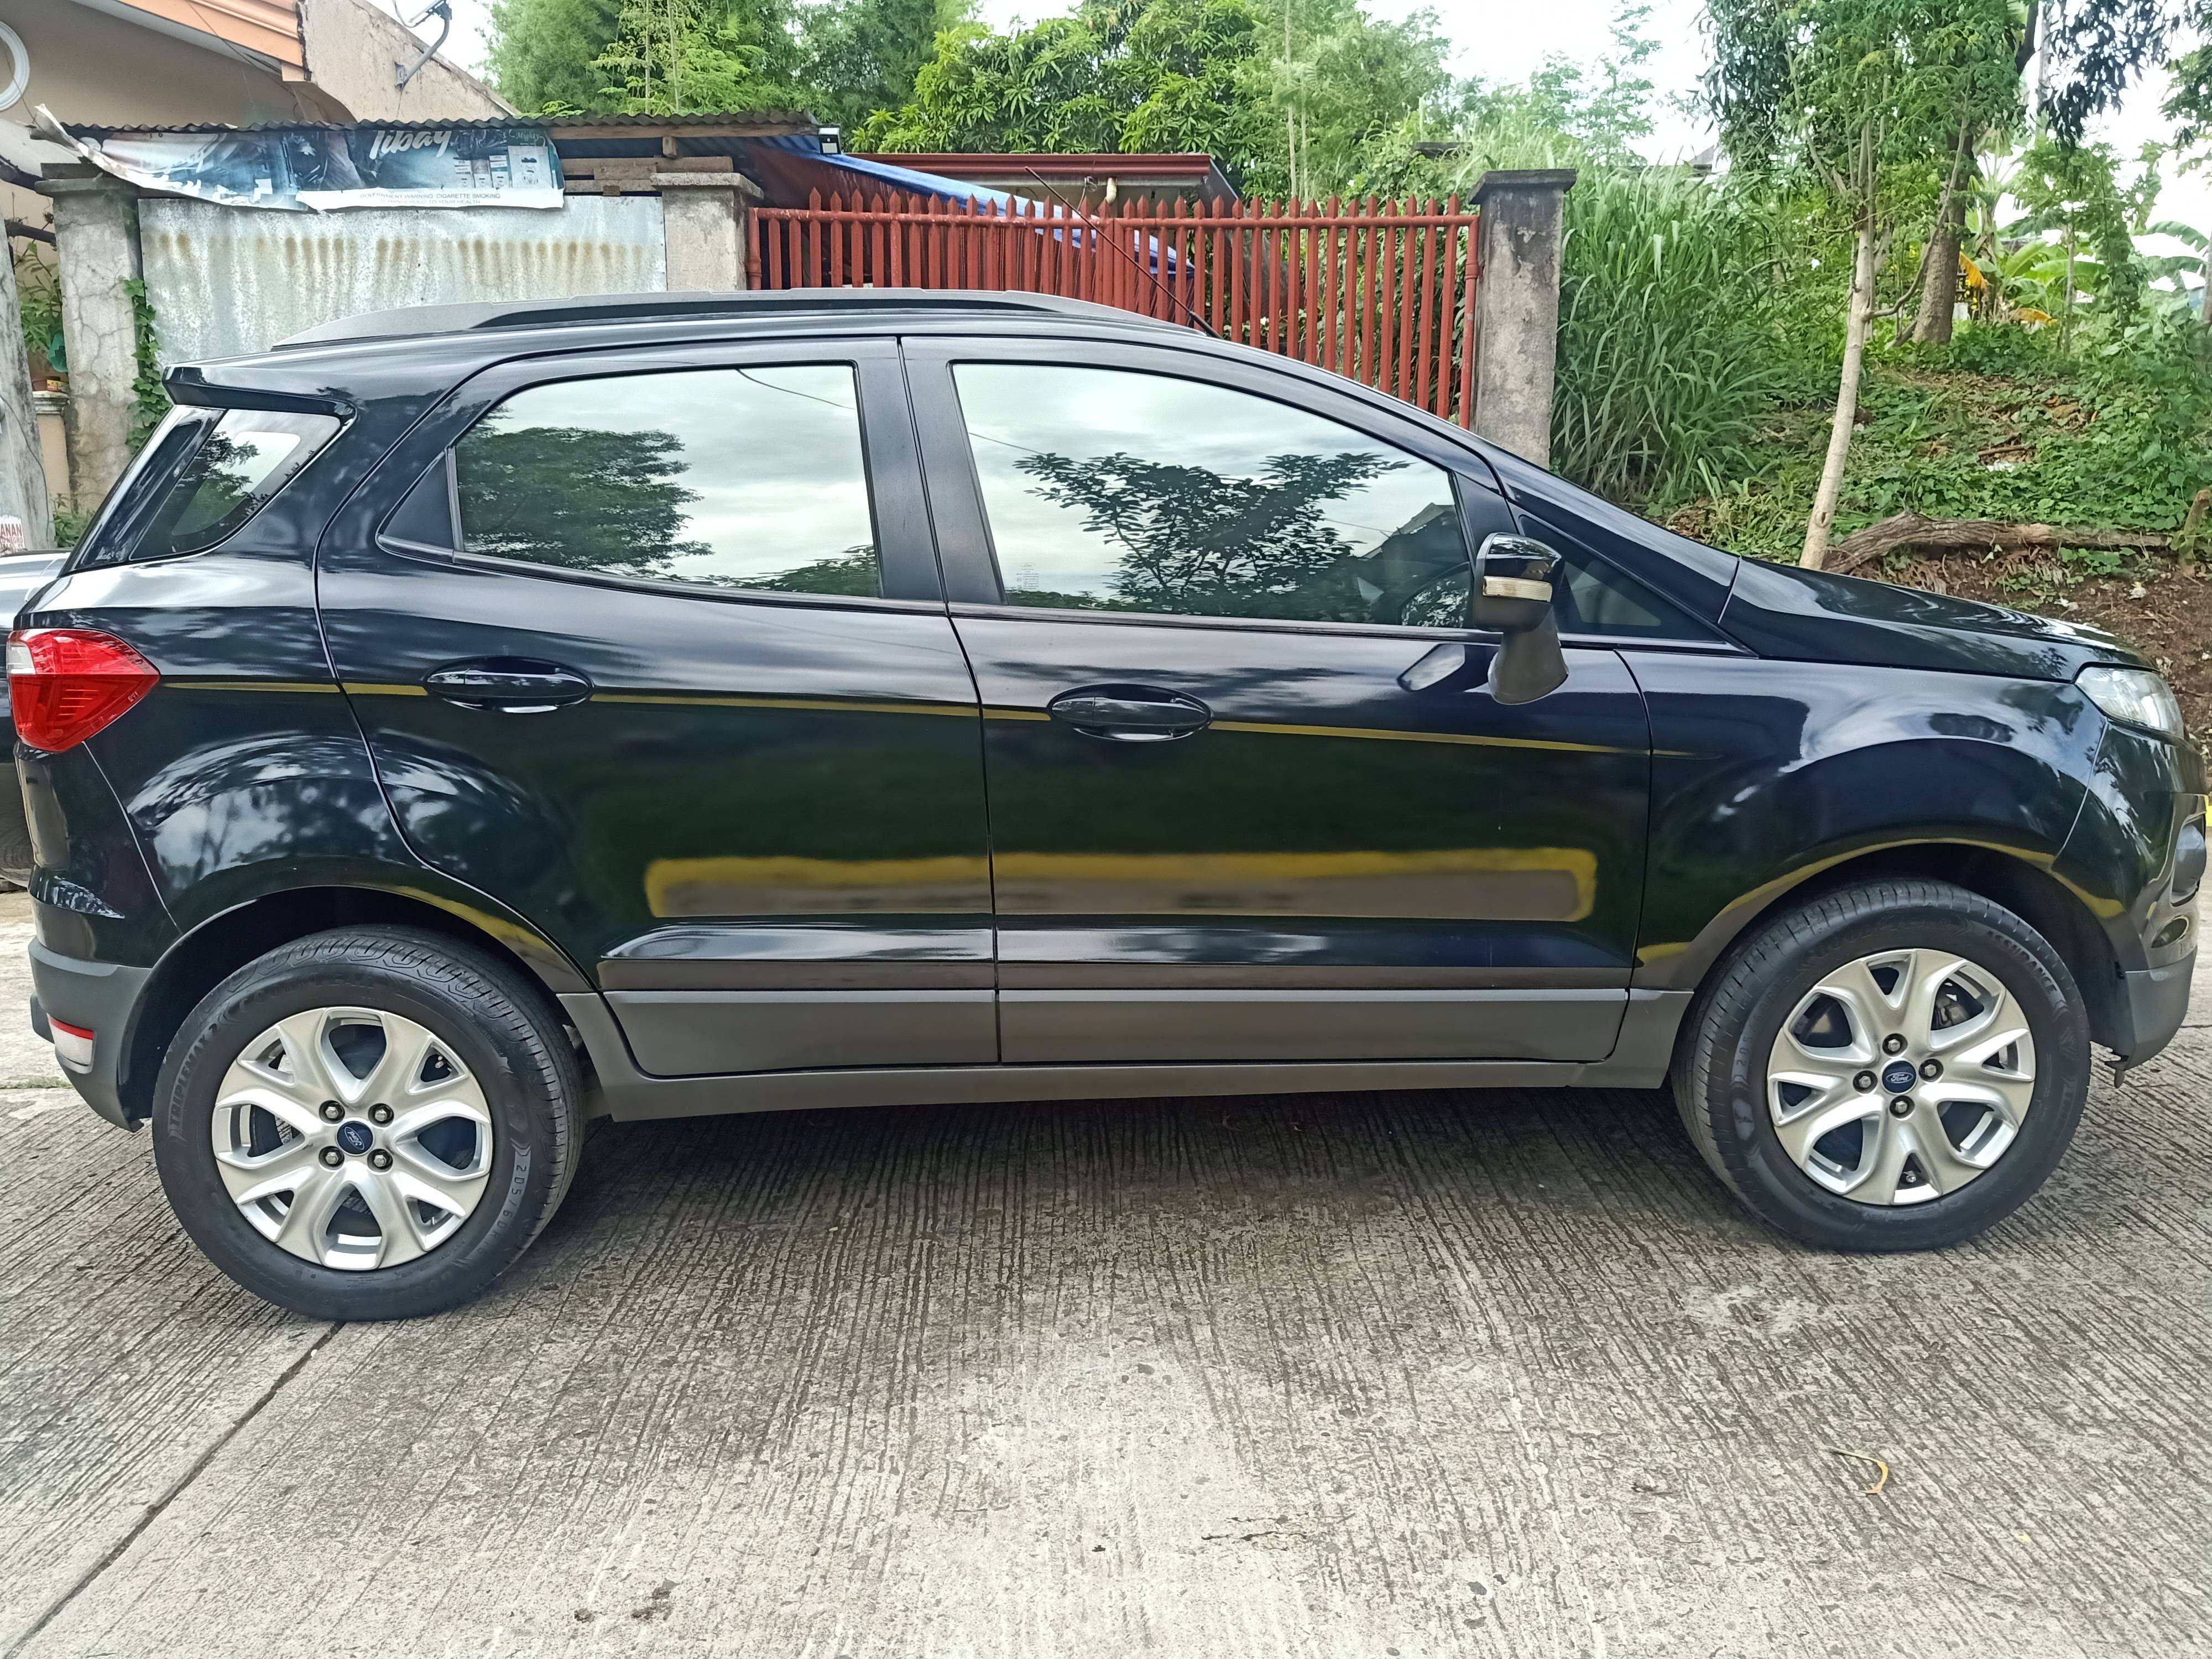 Old 2015 Ford Ecosport 1.5 L Trend AT